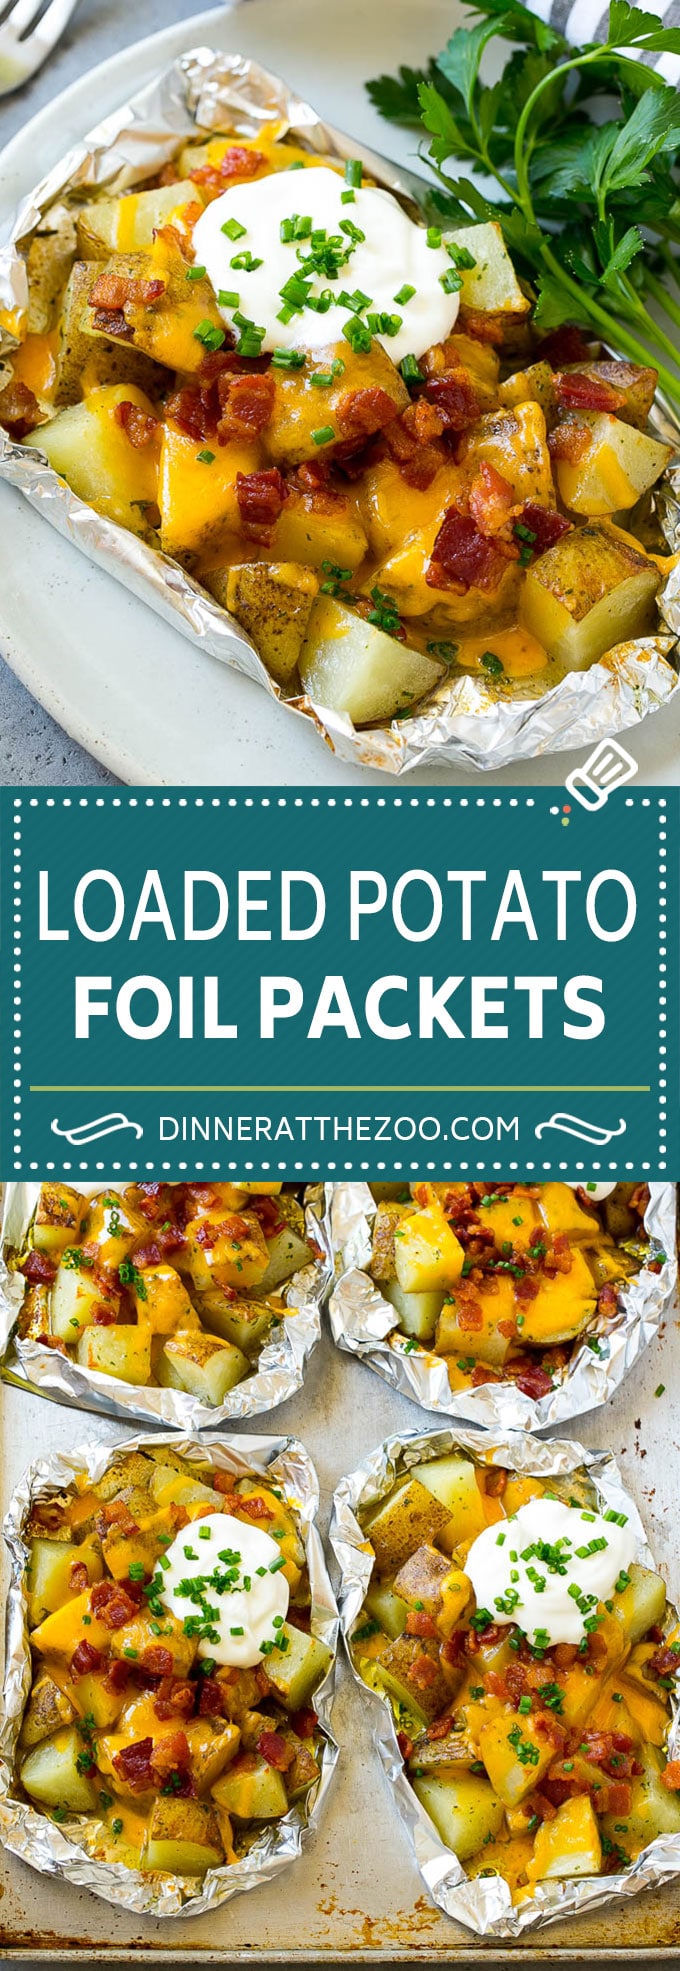 Grilled Potatoes in Foil | Potato Foil Packets | Loaded Potatoes #potatoes #bacon #cheese #grilling #sidedish #dinneratthezoo